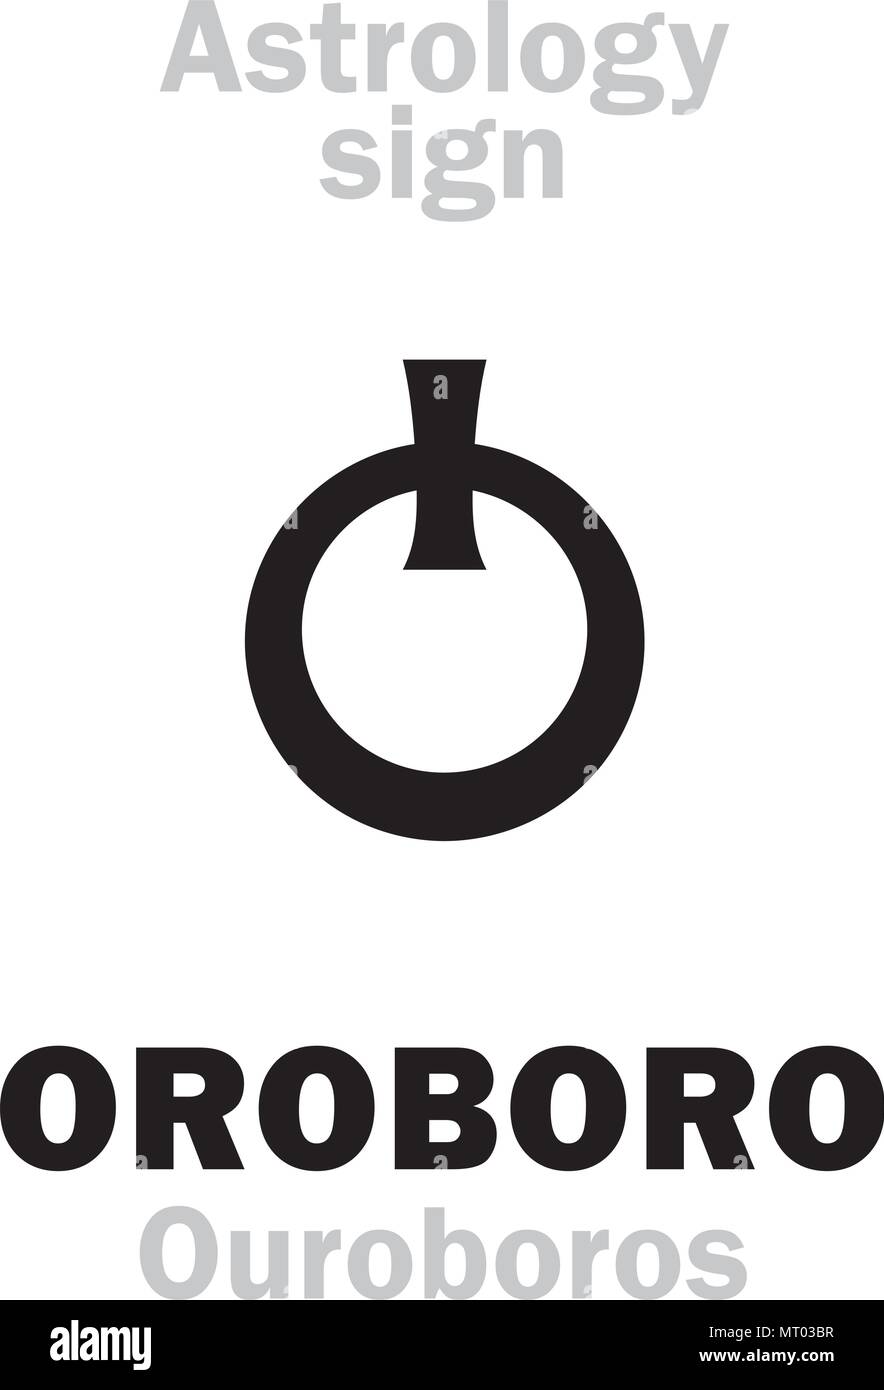 Astrology Alphabet: OROBORO (Ouroboros), Serpent devouring its own tail. Hieroglyphics character sign (single symbol). Stock Vector